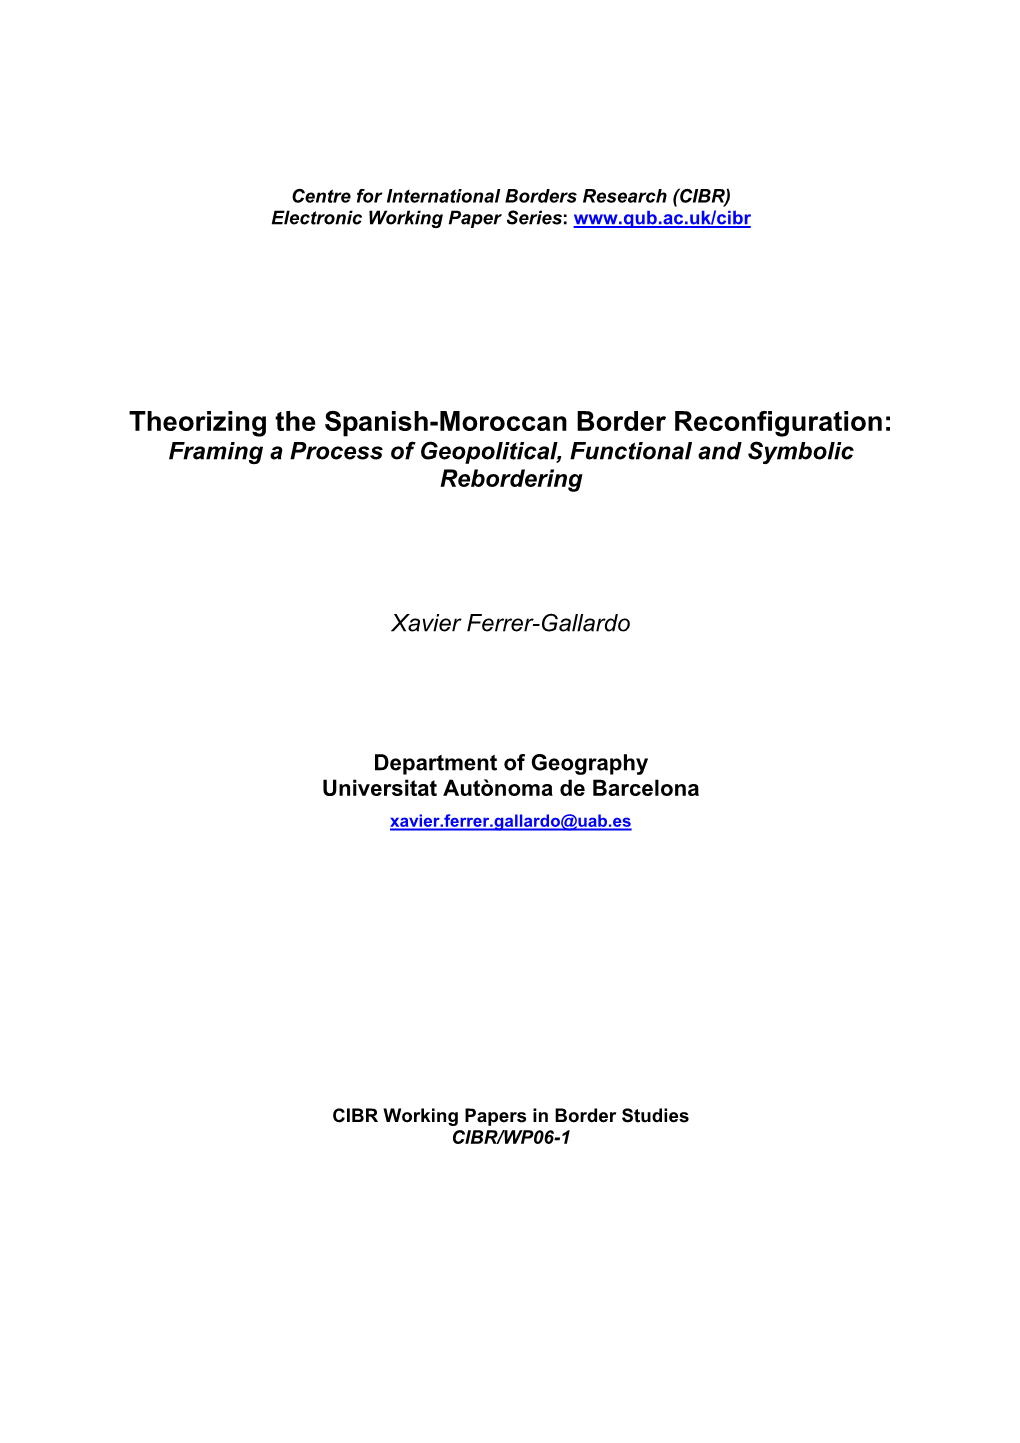 Theorizing the Spanish-Moroccan Border Reconfiguration: Framing a Process of Geopolitical, Functional and Symbolic Rebordering